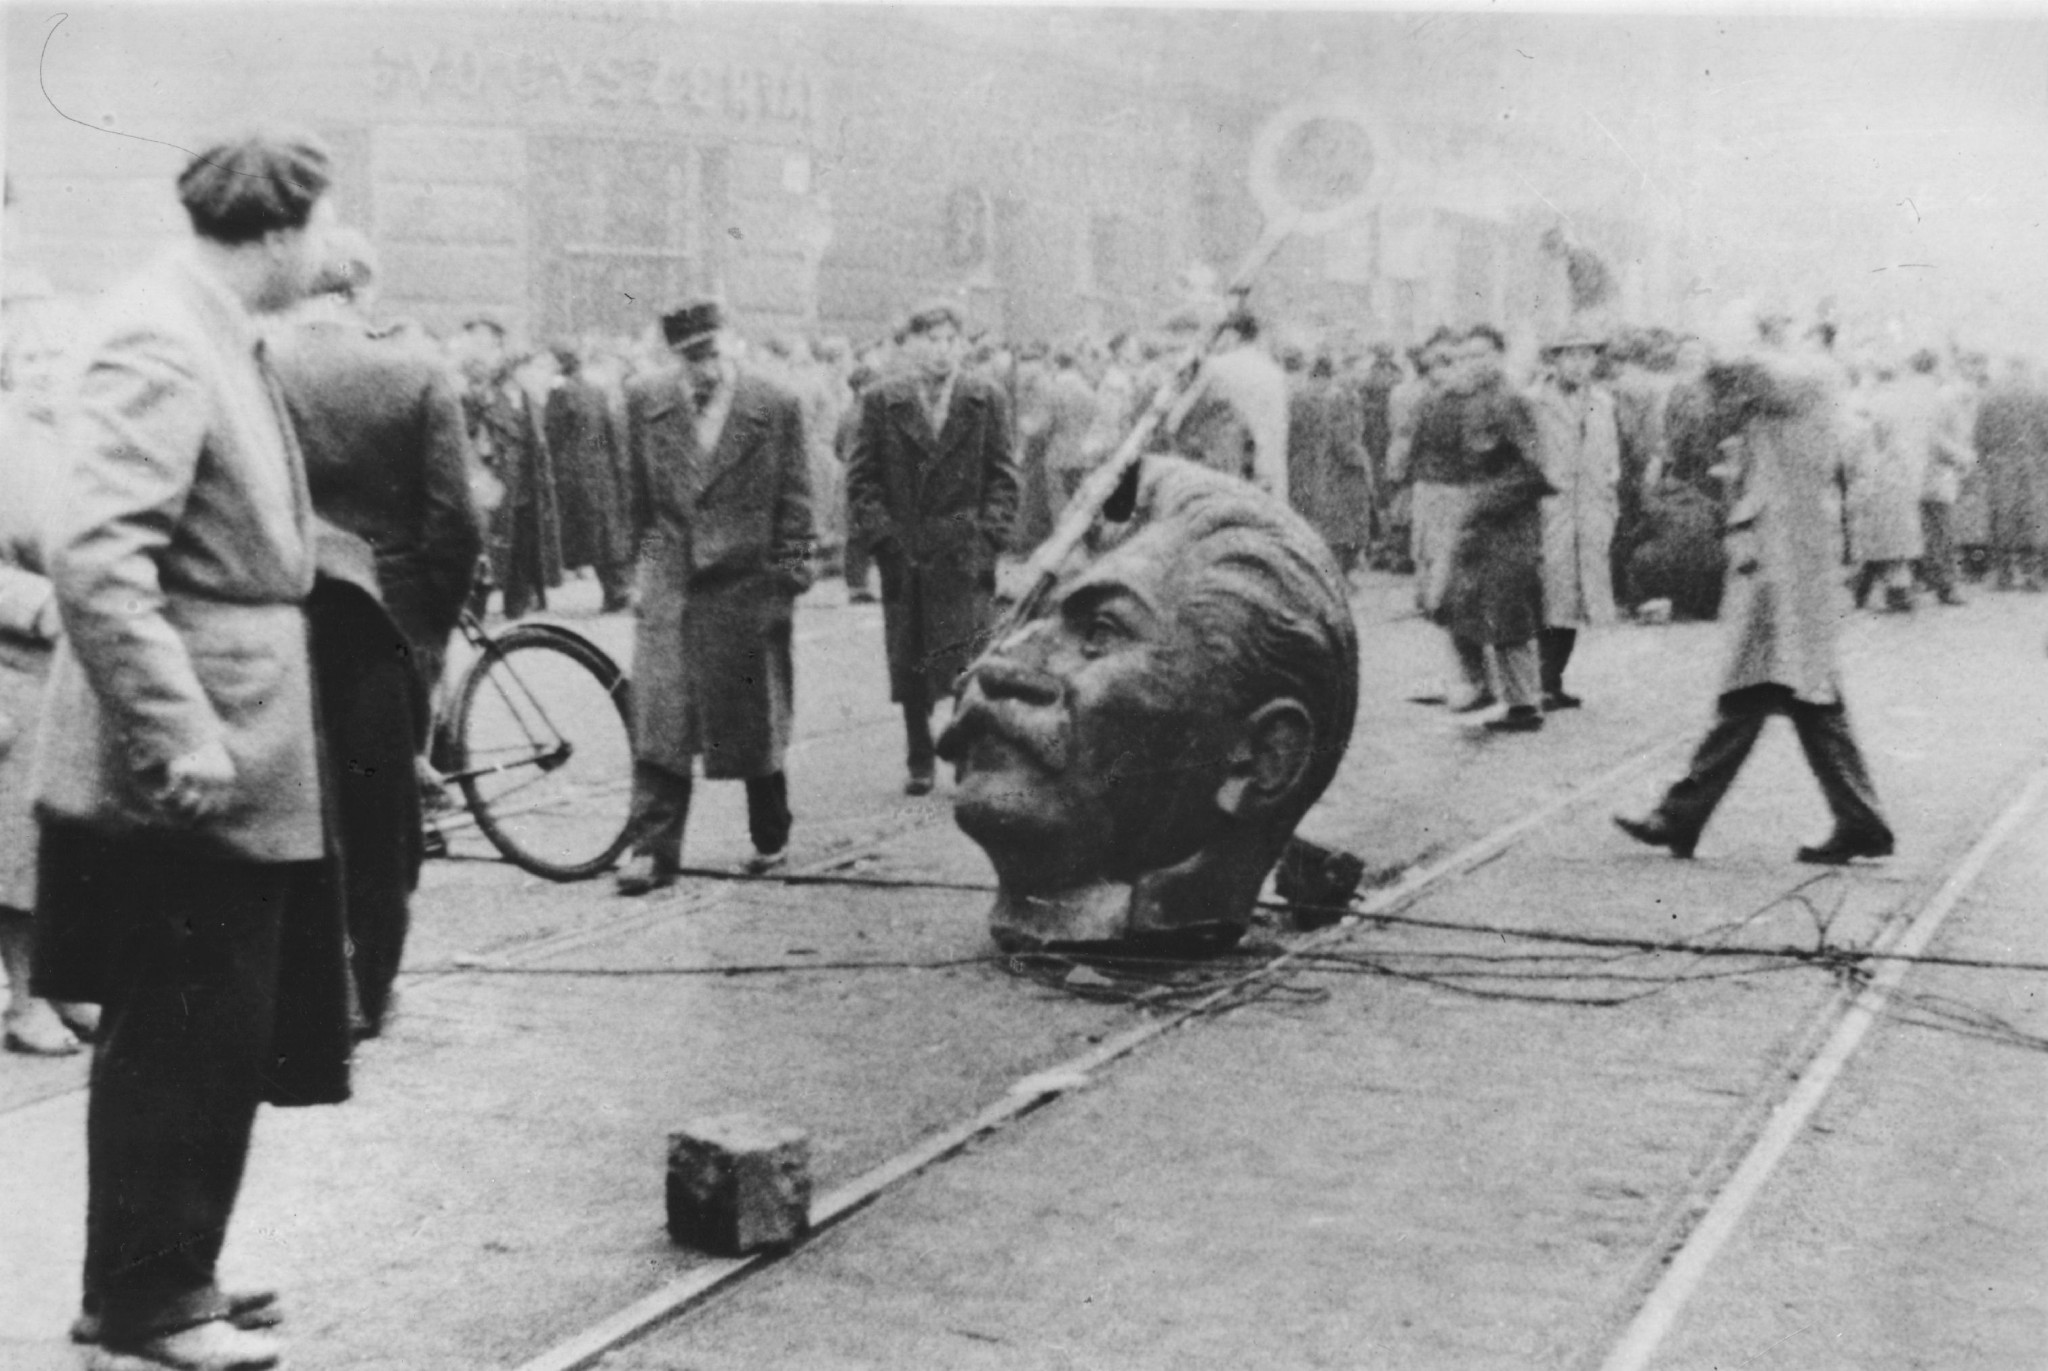 A statue of Stalin was pulled down by protesters in Budapest during the 1956 Hungarian uprising ©Getty Images